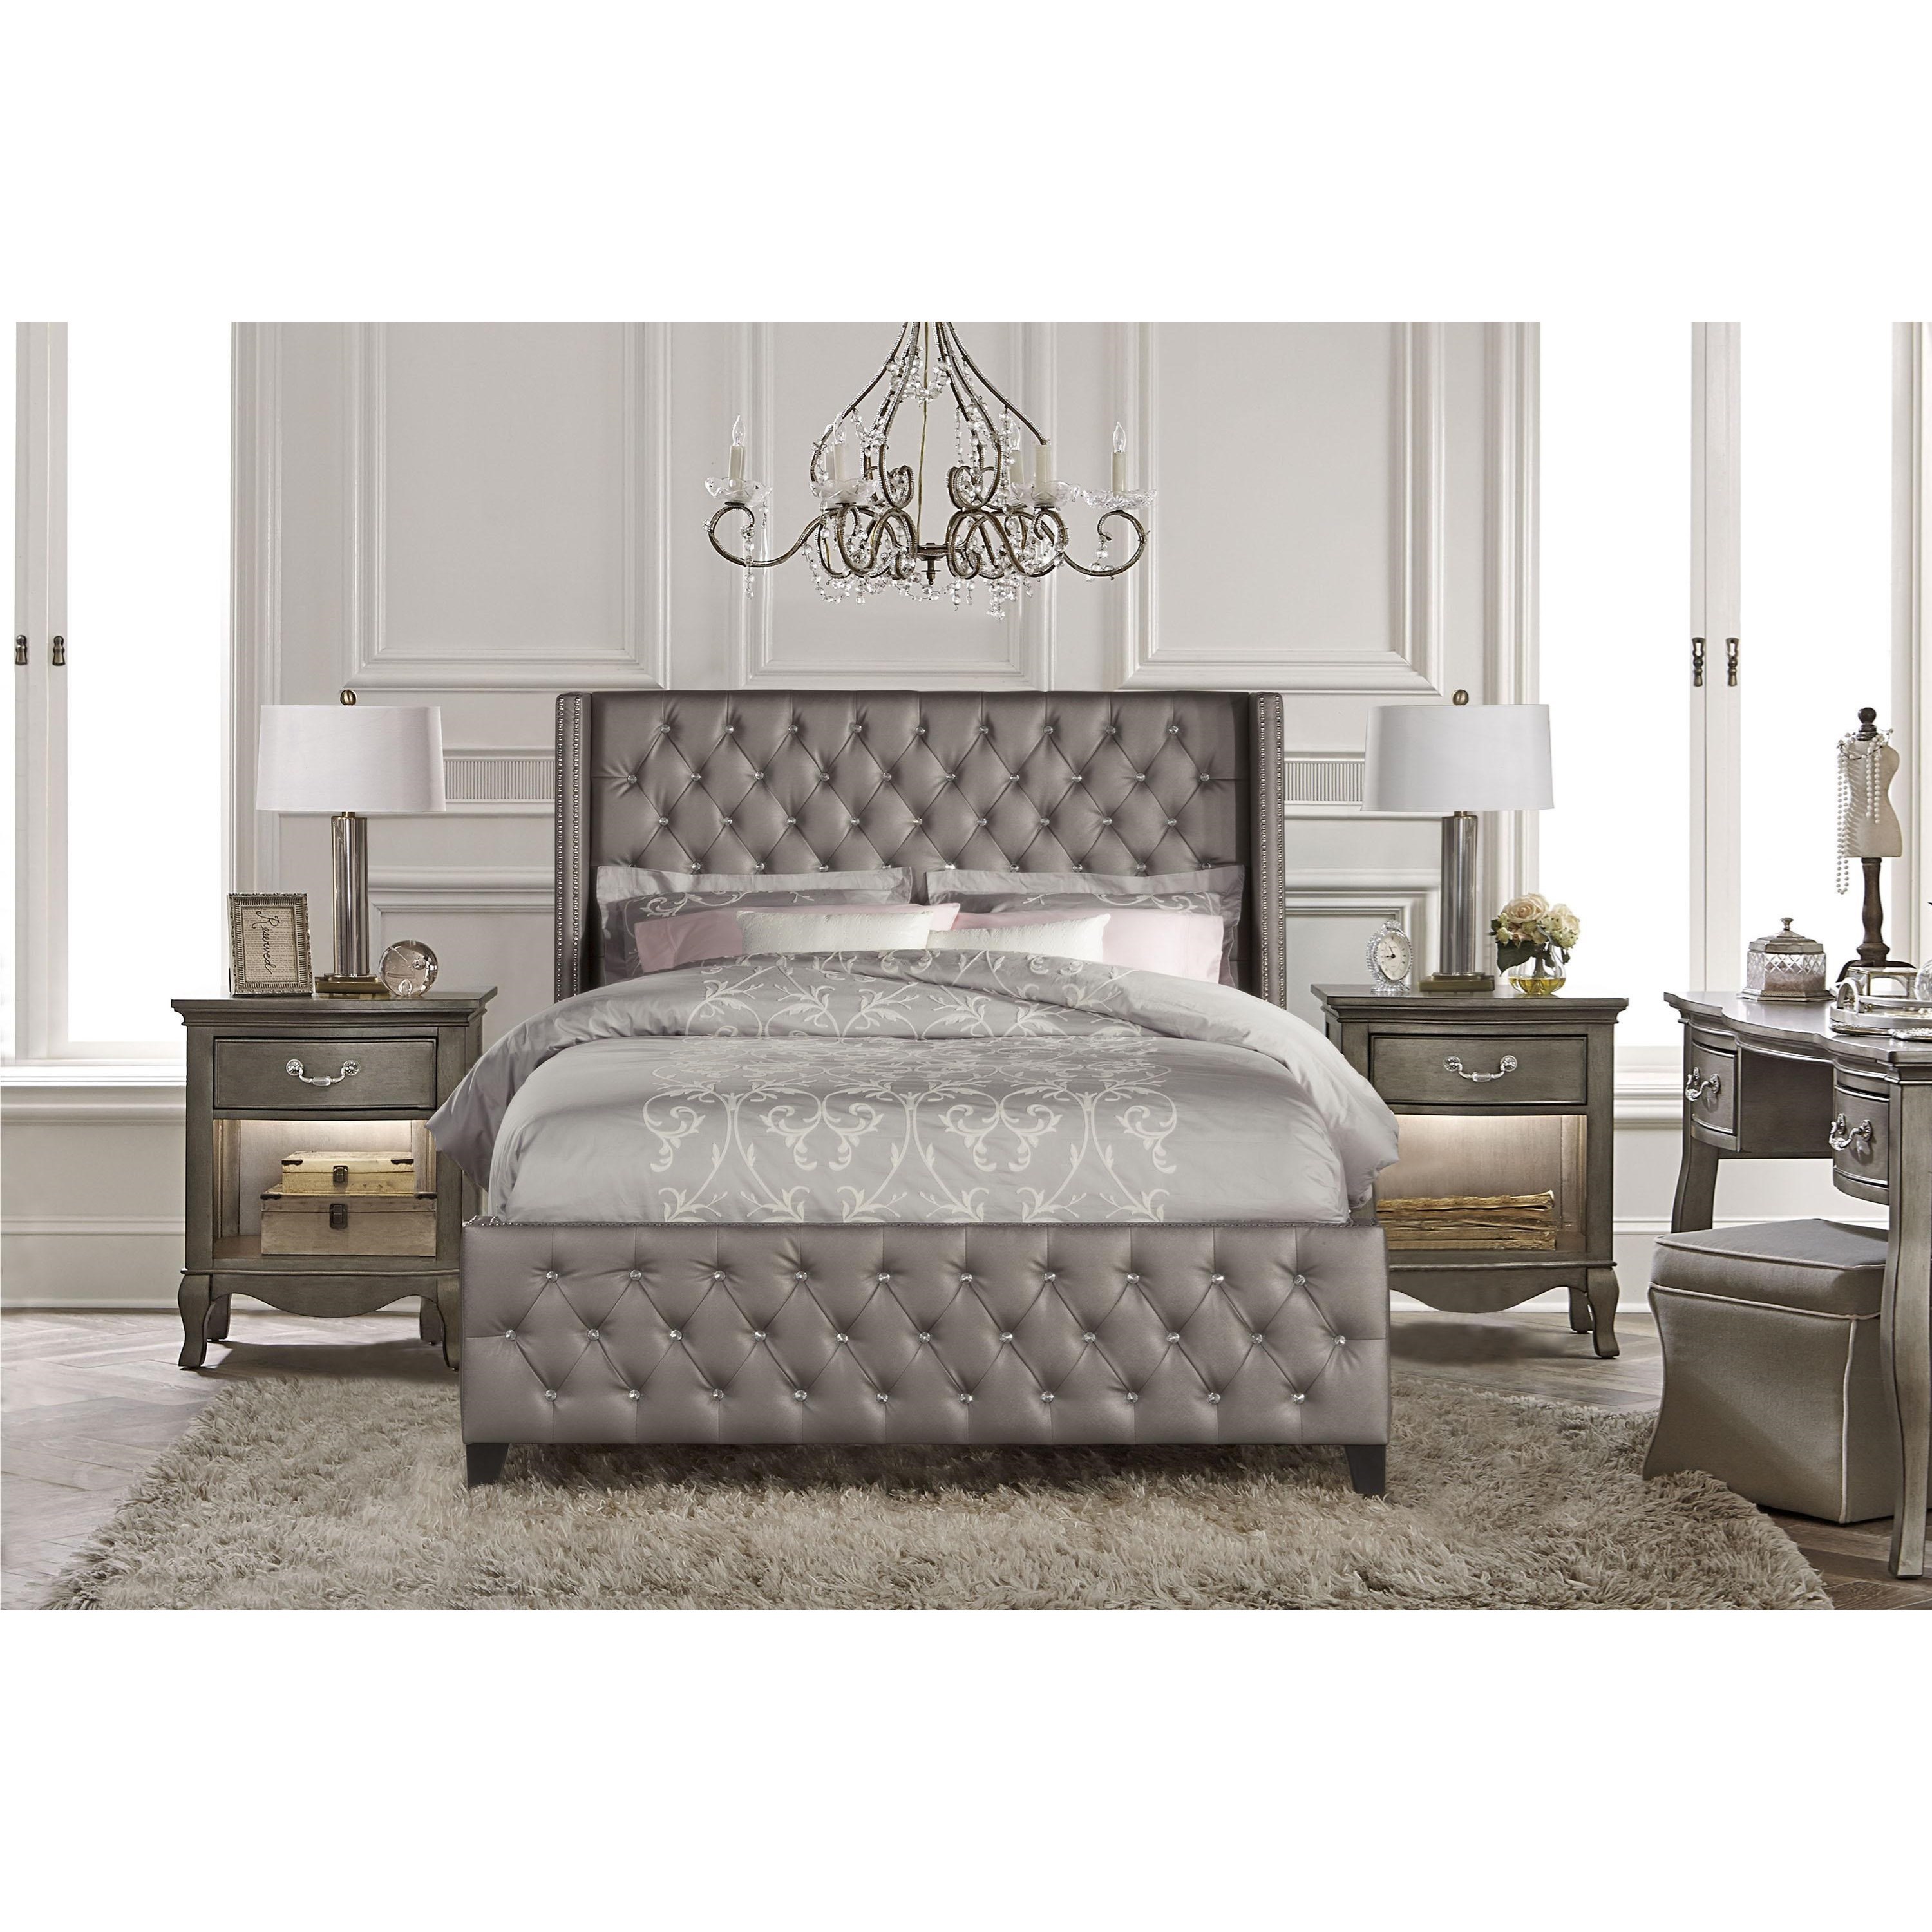 hillsdale upholstered beds king queen bed set with rails IKDYKOT